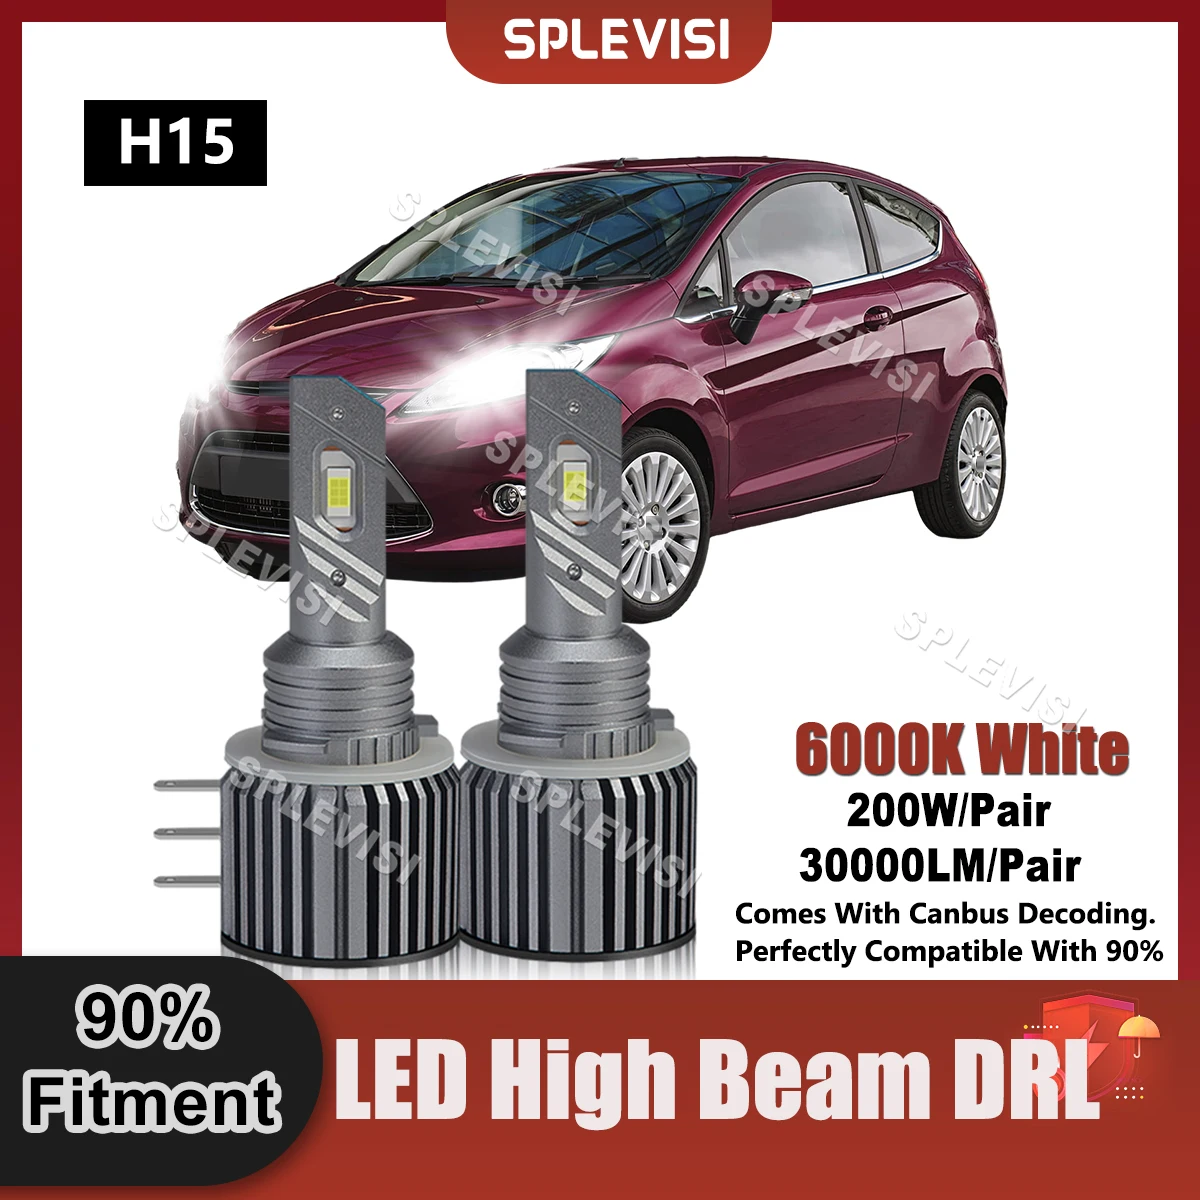 

Plug And Play H15 LED High Beam/DRL Day Running Light For Ford Fiesta VI MK6 Fiesta Mk7 Ford Mondeo V Canbus Car Replace Bulbs